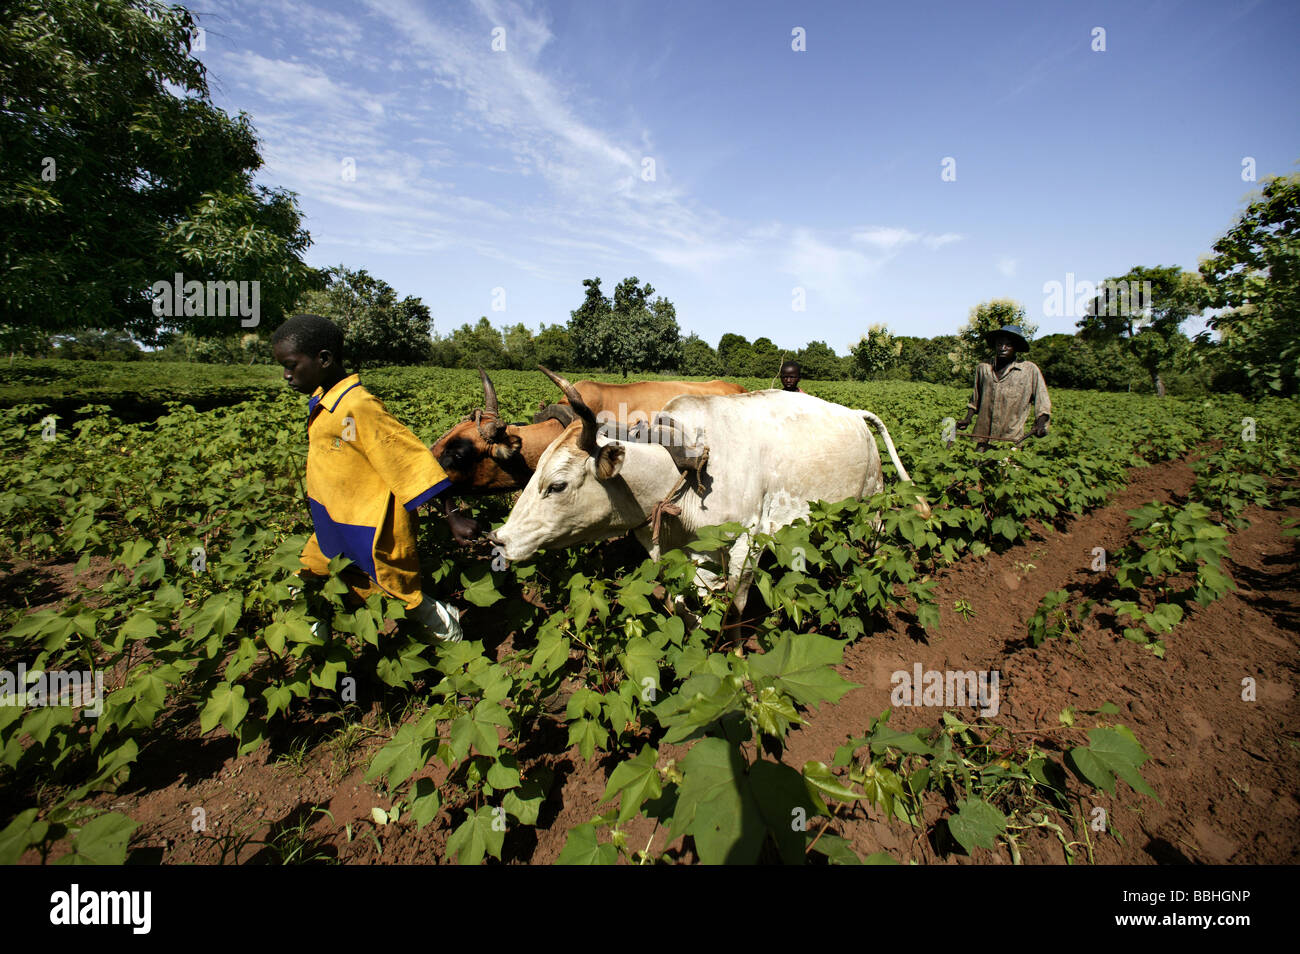 Workers on the Kolanjeba Organic Cotton Farm near the village of Djembala in Mali, west Africa plough a field with bullocks pull Stock Photo